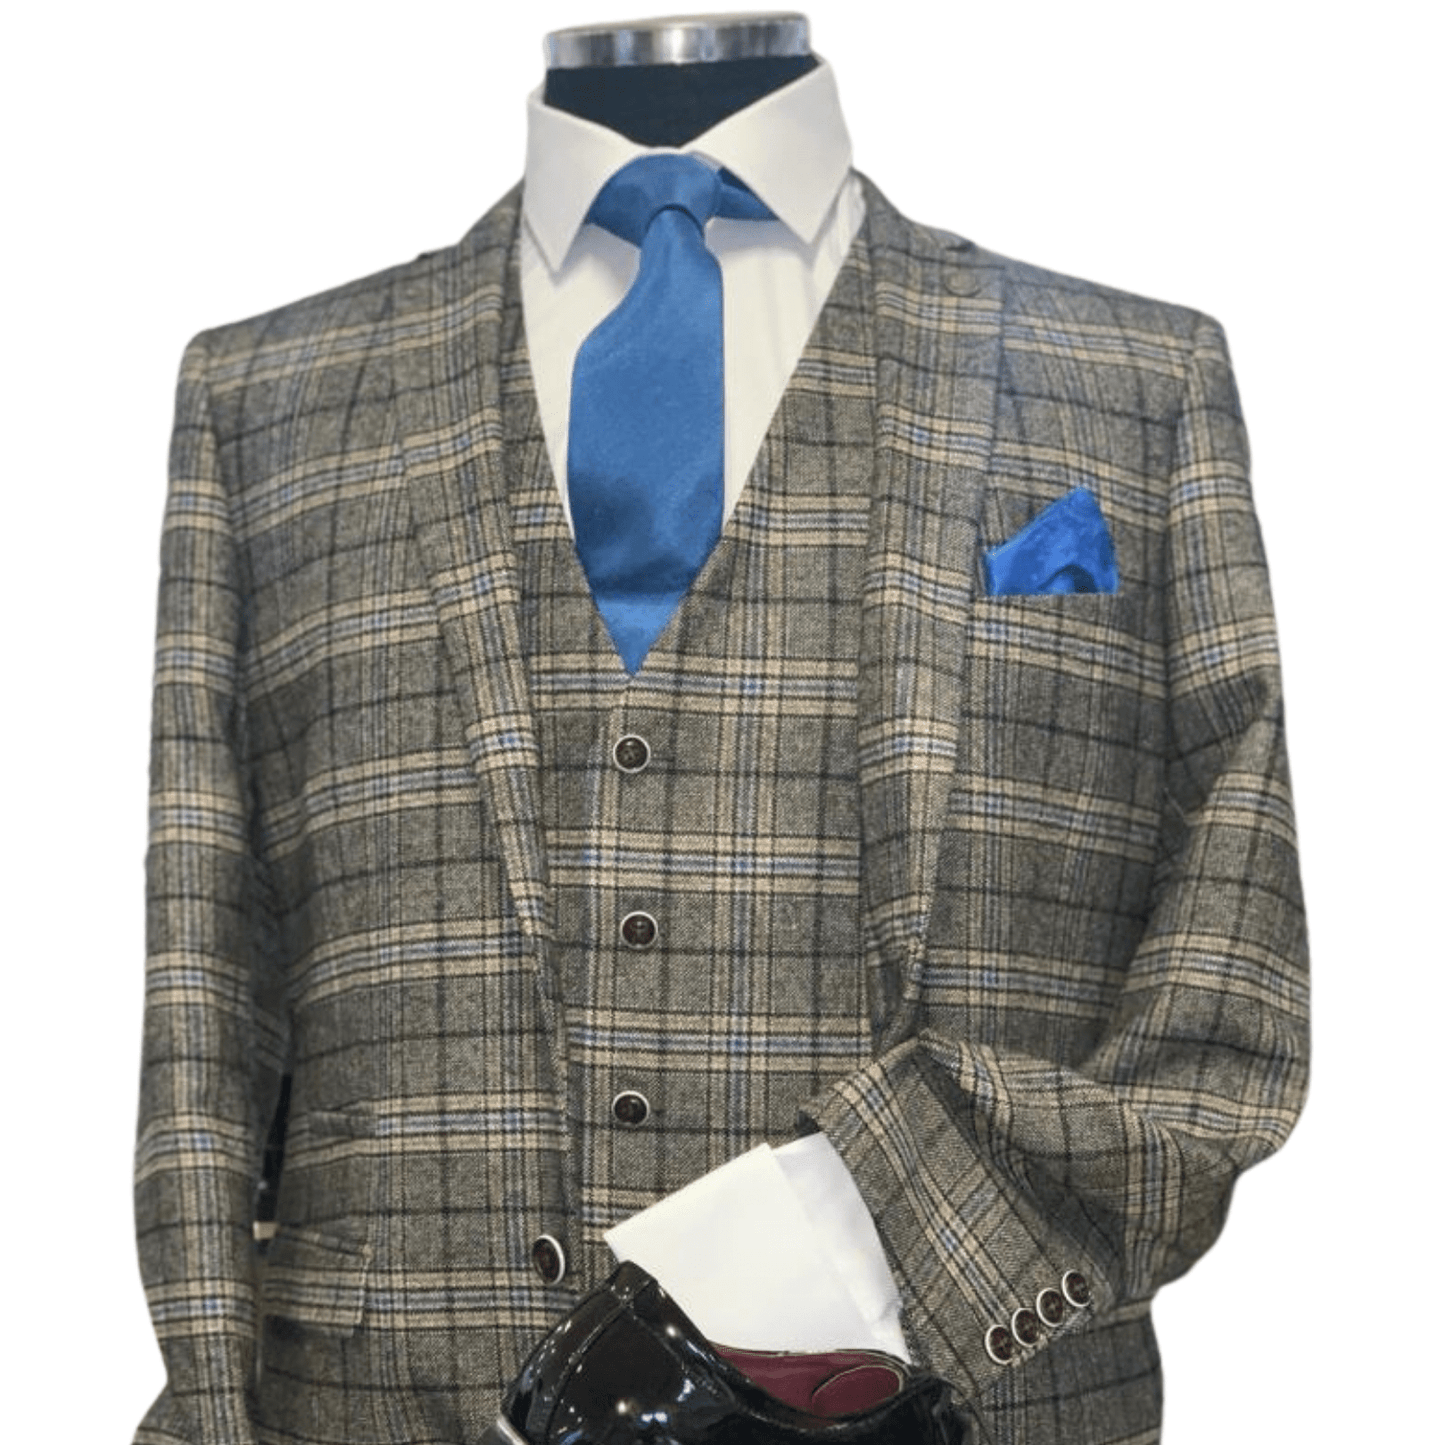 Paul Andrews Kurt Grey, A tailored 3 piece suit, Suit deal available.( incl shoes , shirt and tie )